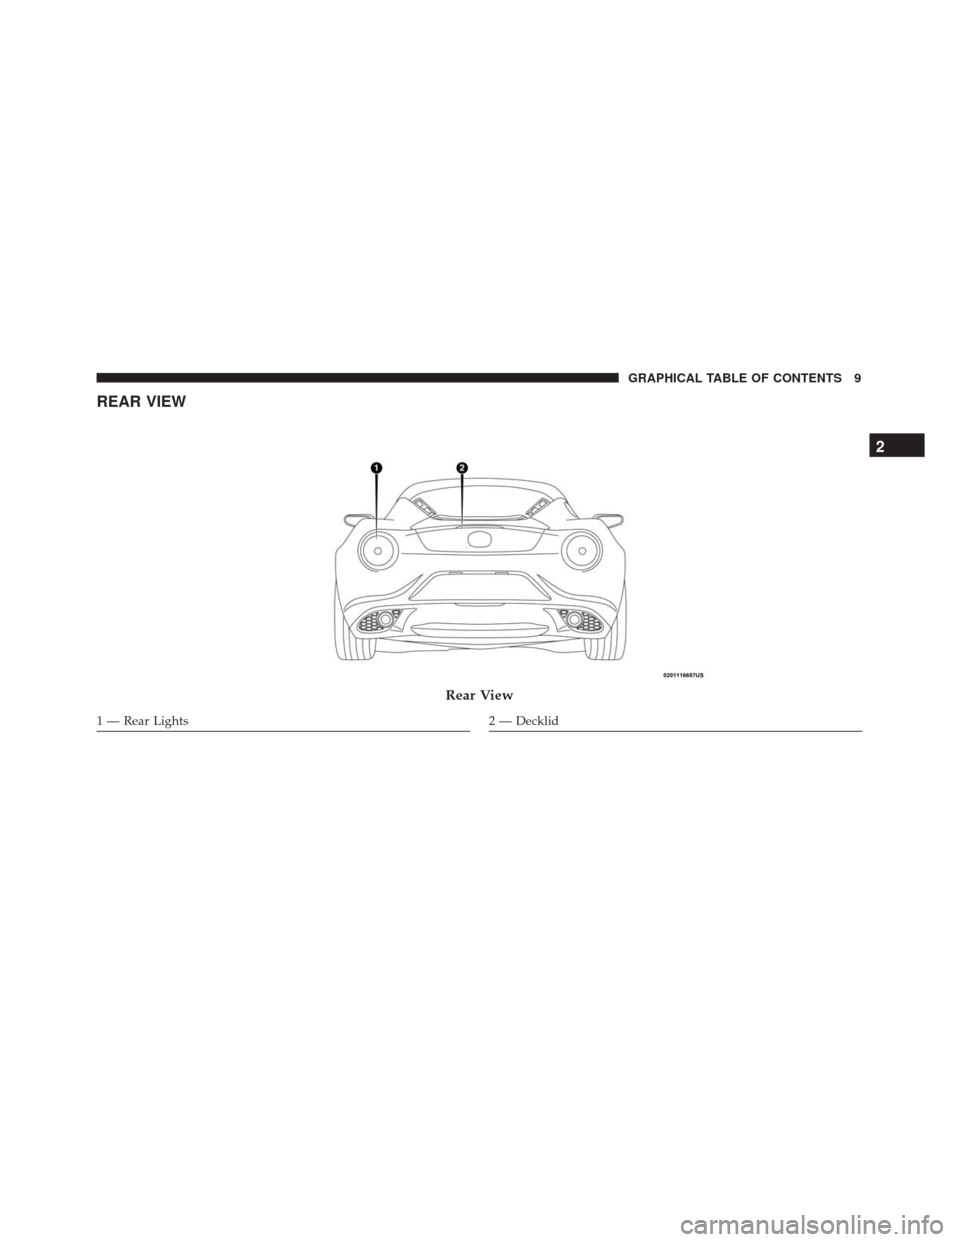 Alfa Romeo 4C Spider 2018 User Guide REAR VIEW
Rear View
1 — Rear Lights2 — Decklid
2
GRAPHICAL TABLE OF CONTENTS 9 